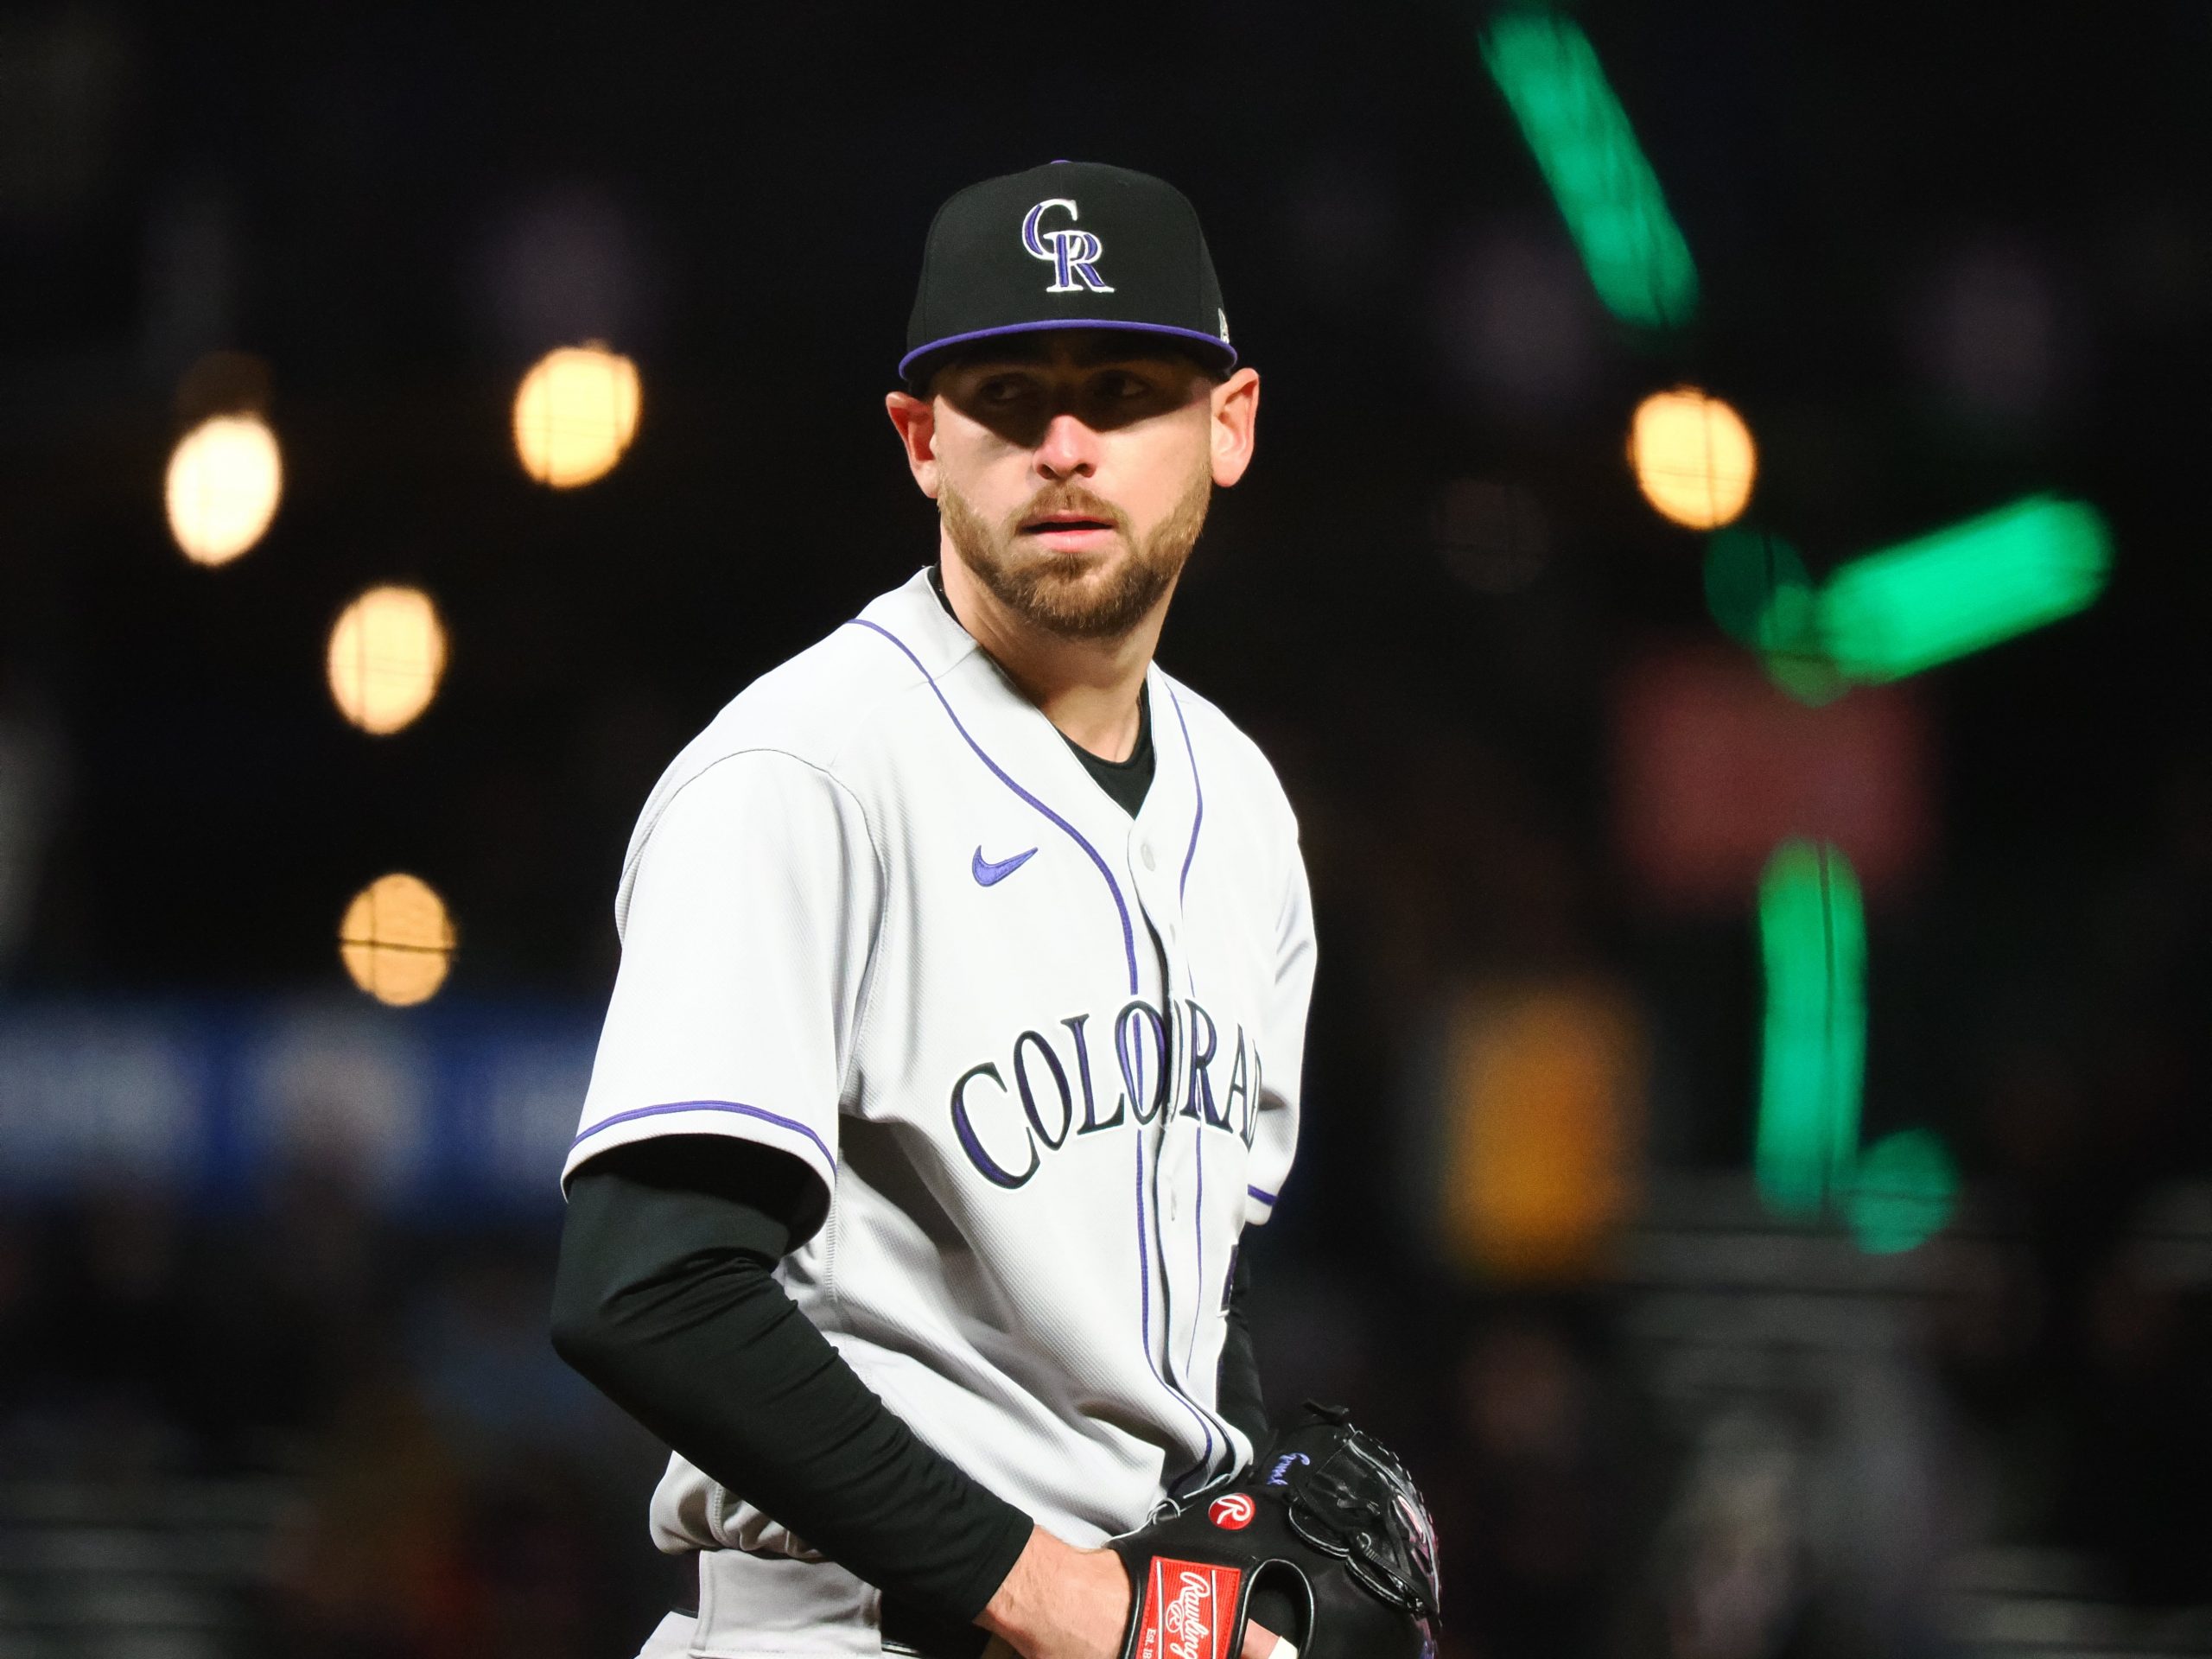 Colorado Rockies starting pitcher Austin Gomber (26) on the mound against the San Francisco Giants during the sixth inning at Oracle Park.